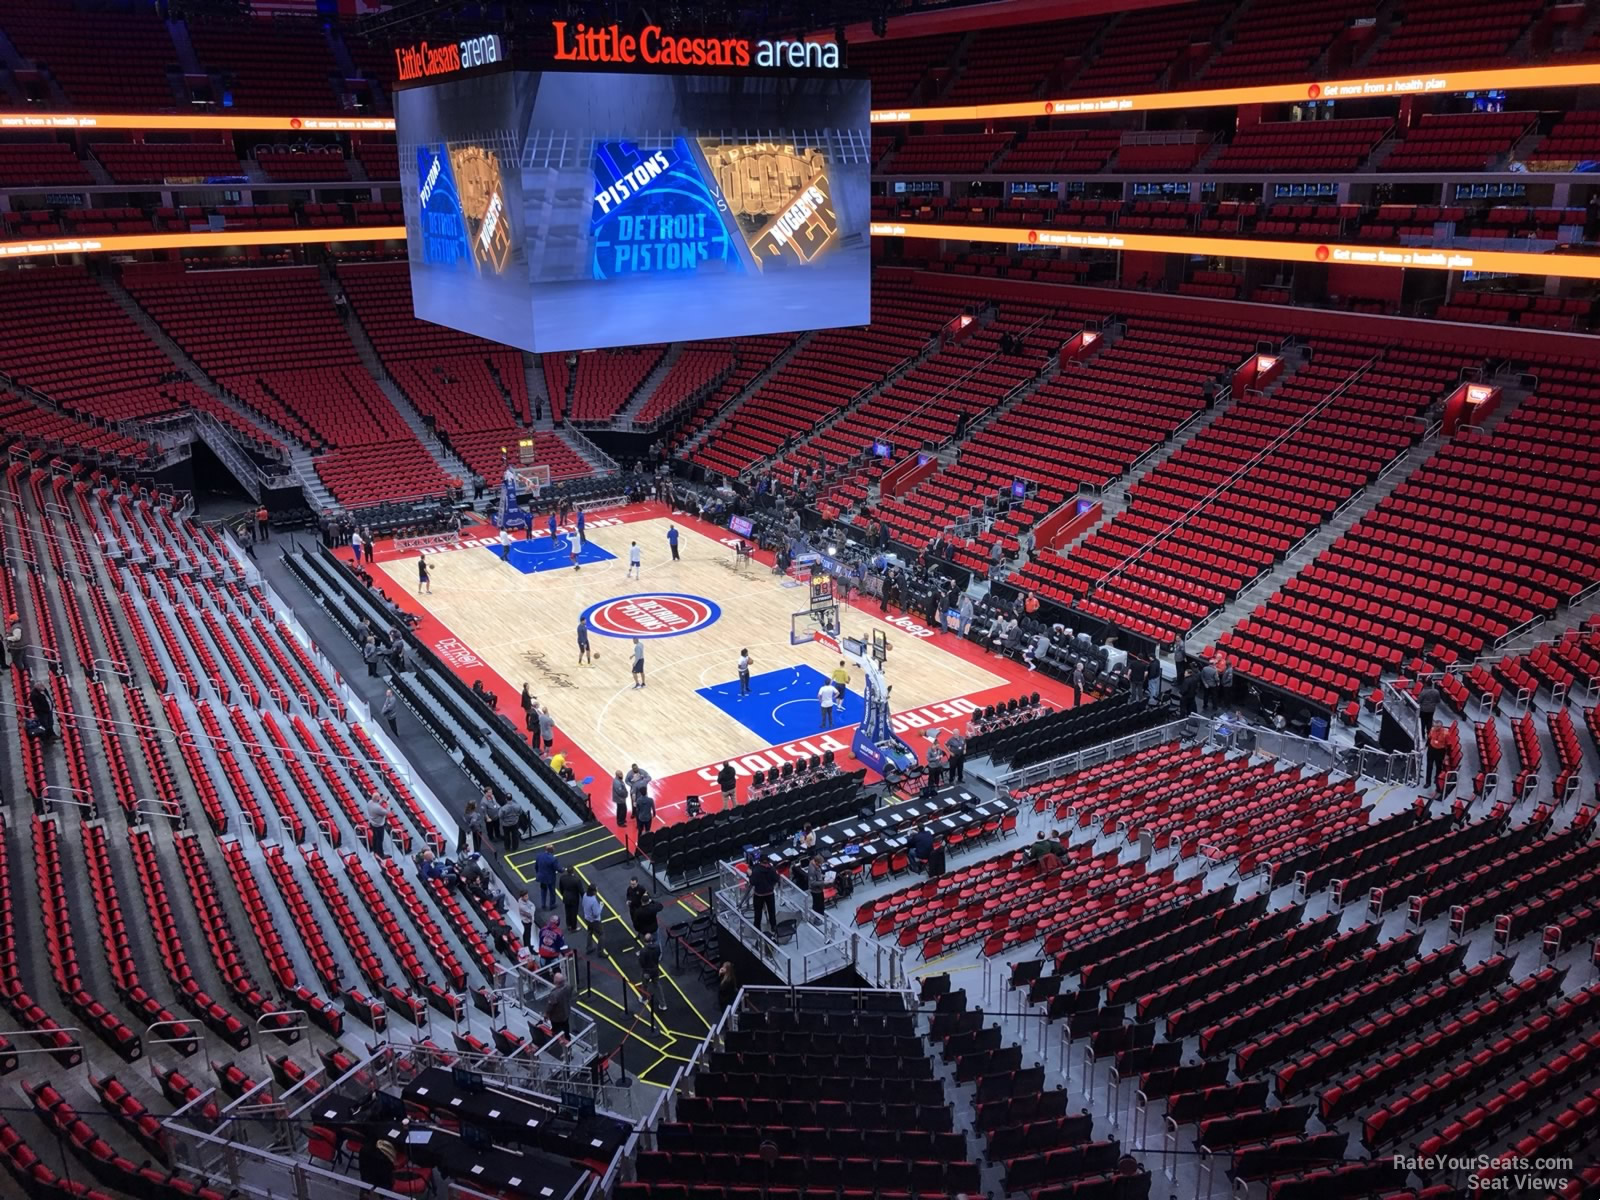 mezzanine 4, row 2 seat view  for basketball - little caesars arena